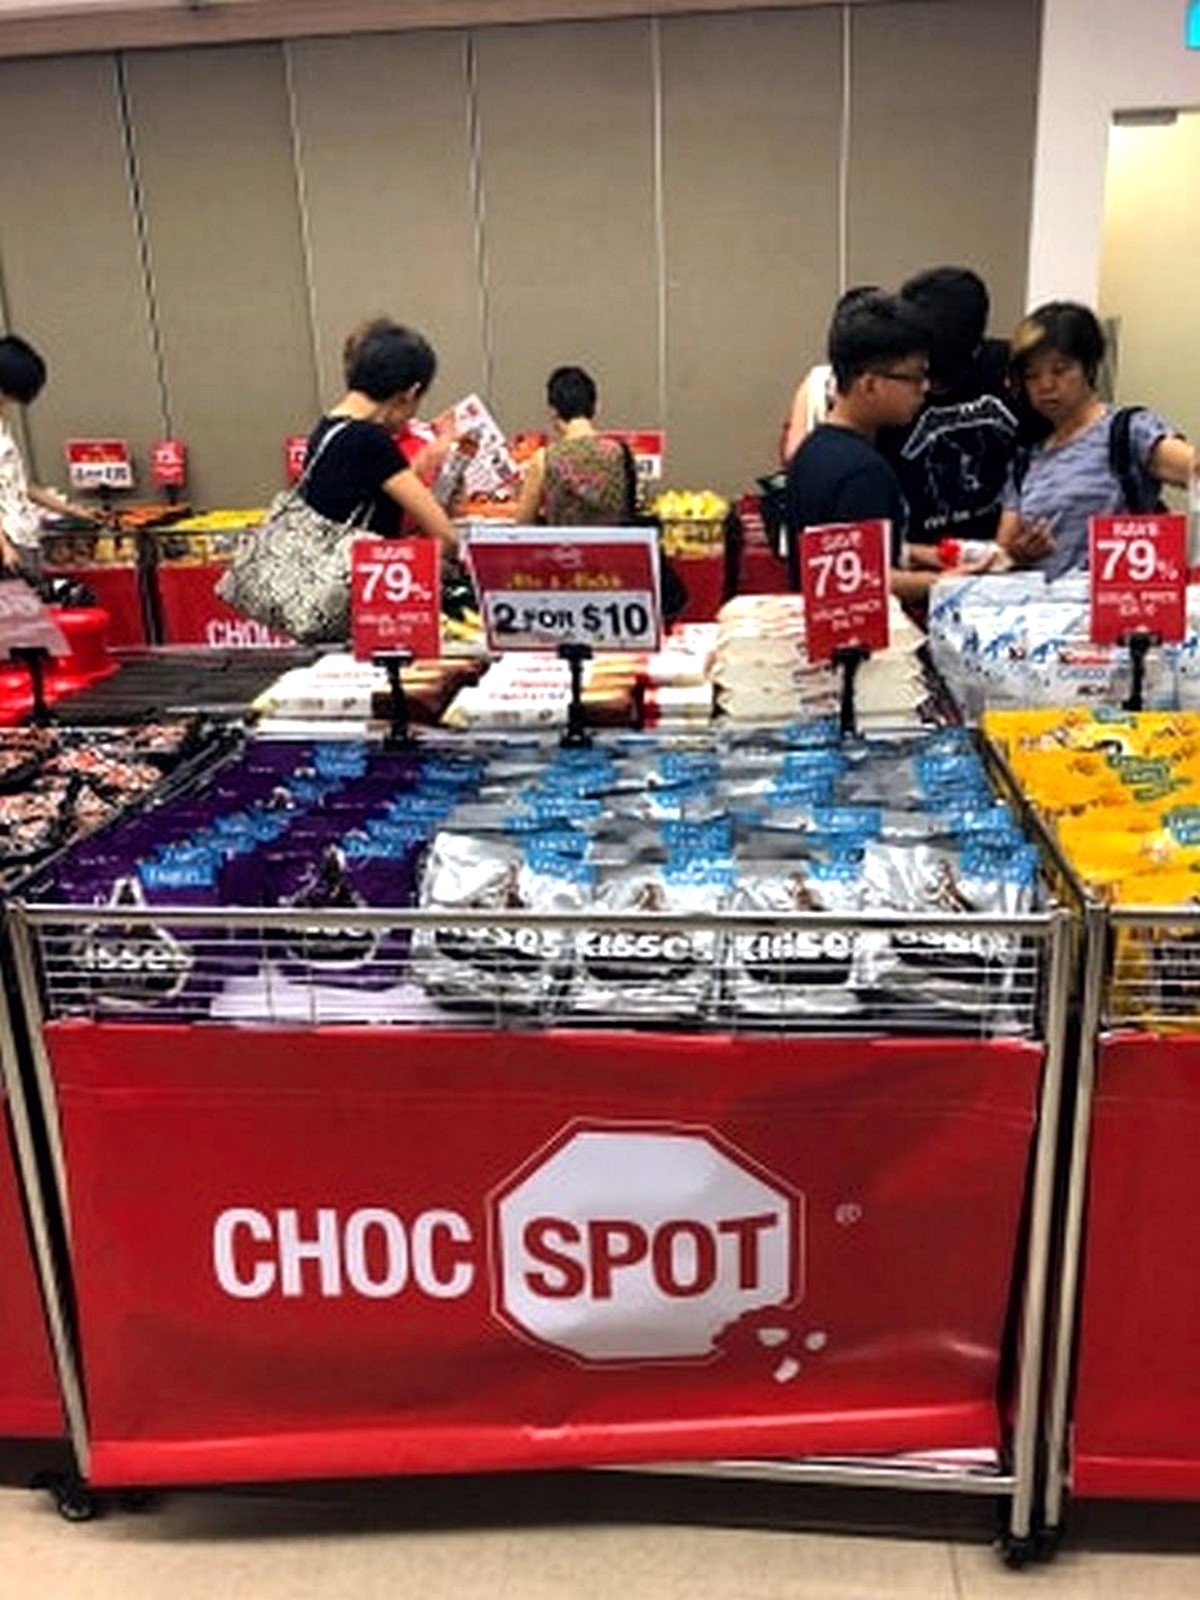 Choc-Spot-Warehouse-Sale-Singapore-2020-Clearance-Chocolate-Candy-Discounts-001 24 Jul-2 Aug 2020: Choc Spot Warehouse Sale! Up to 80% off Chocolates, Sweets, Chips, Biscuits!